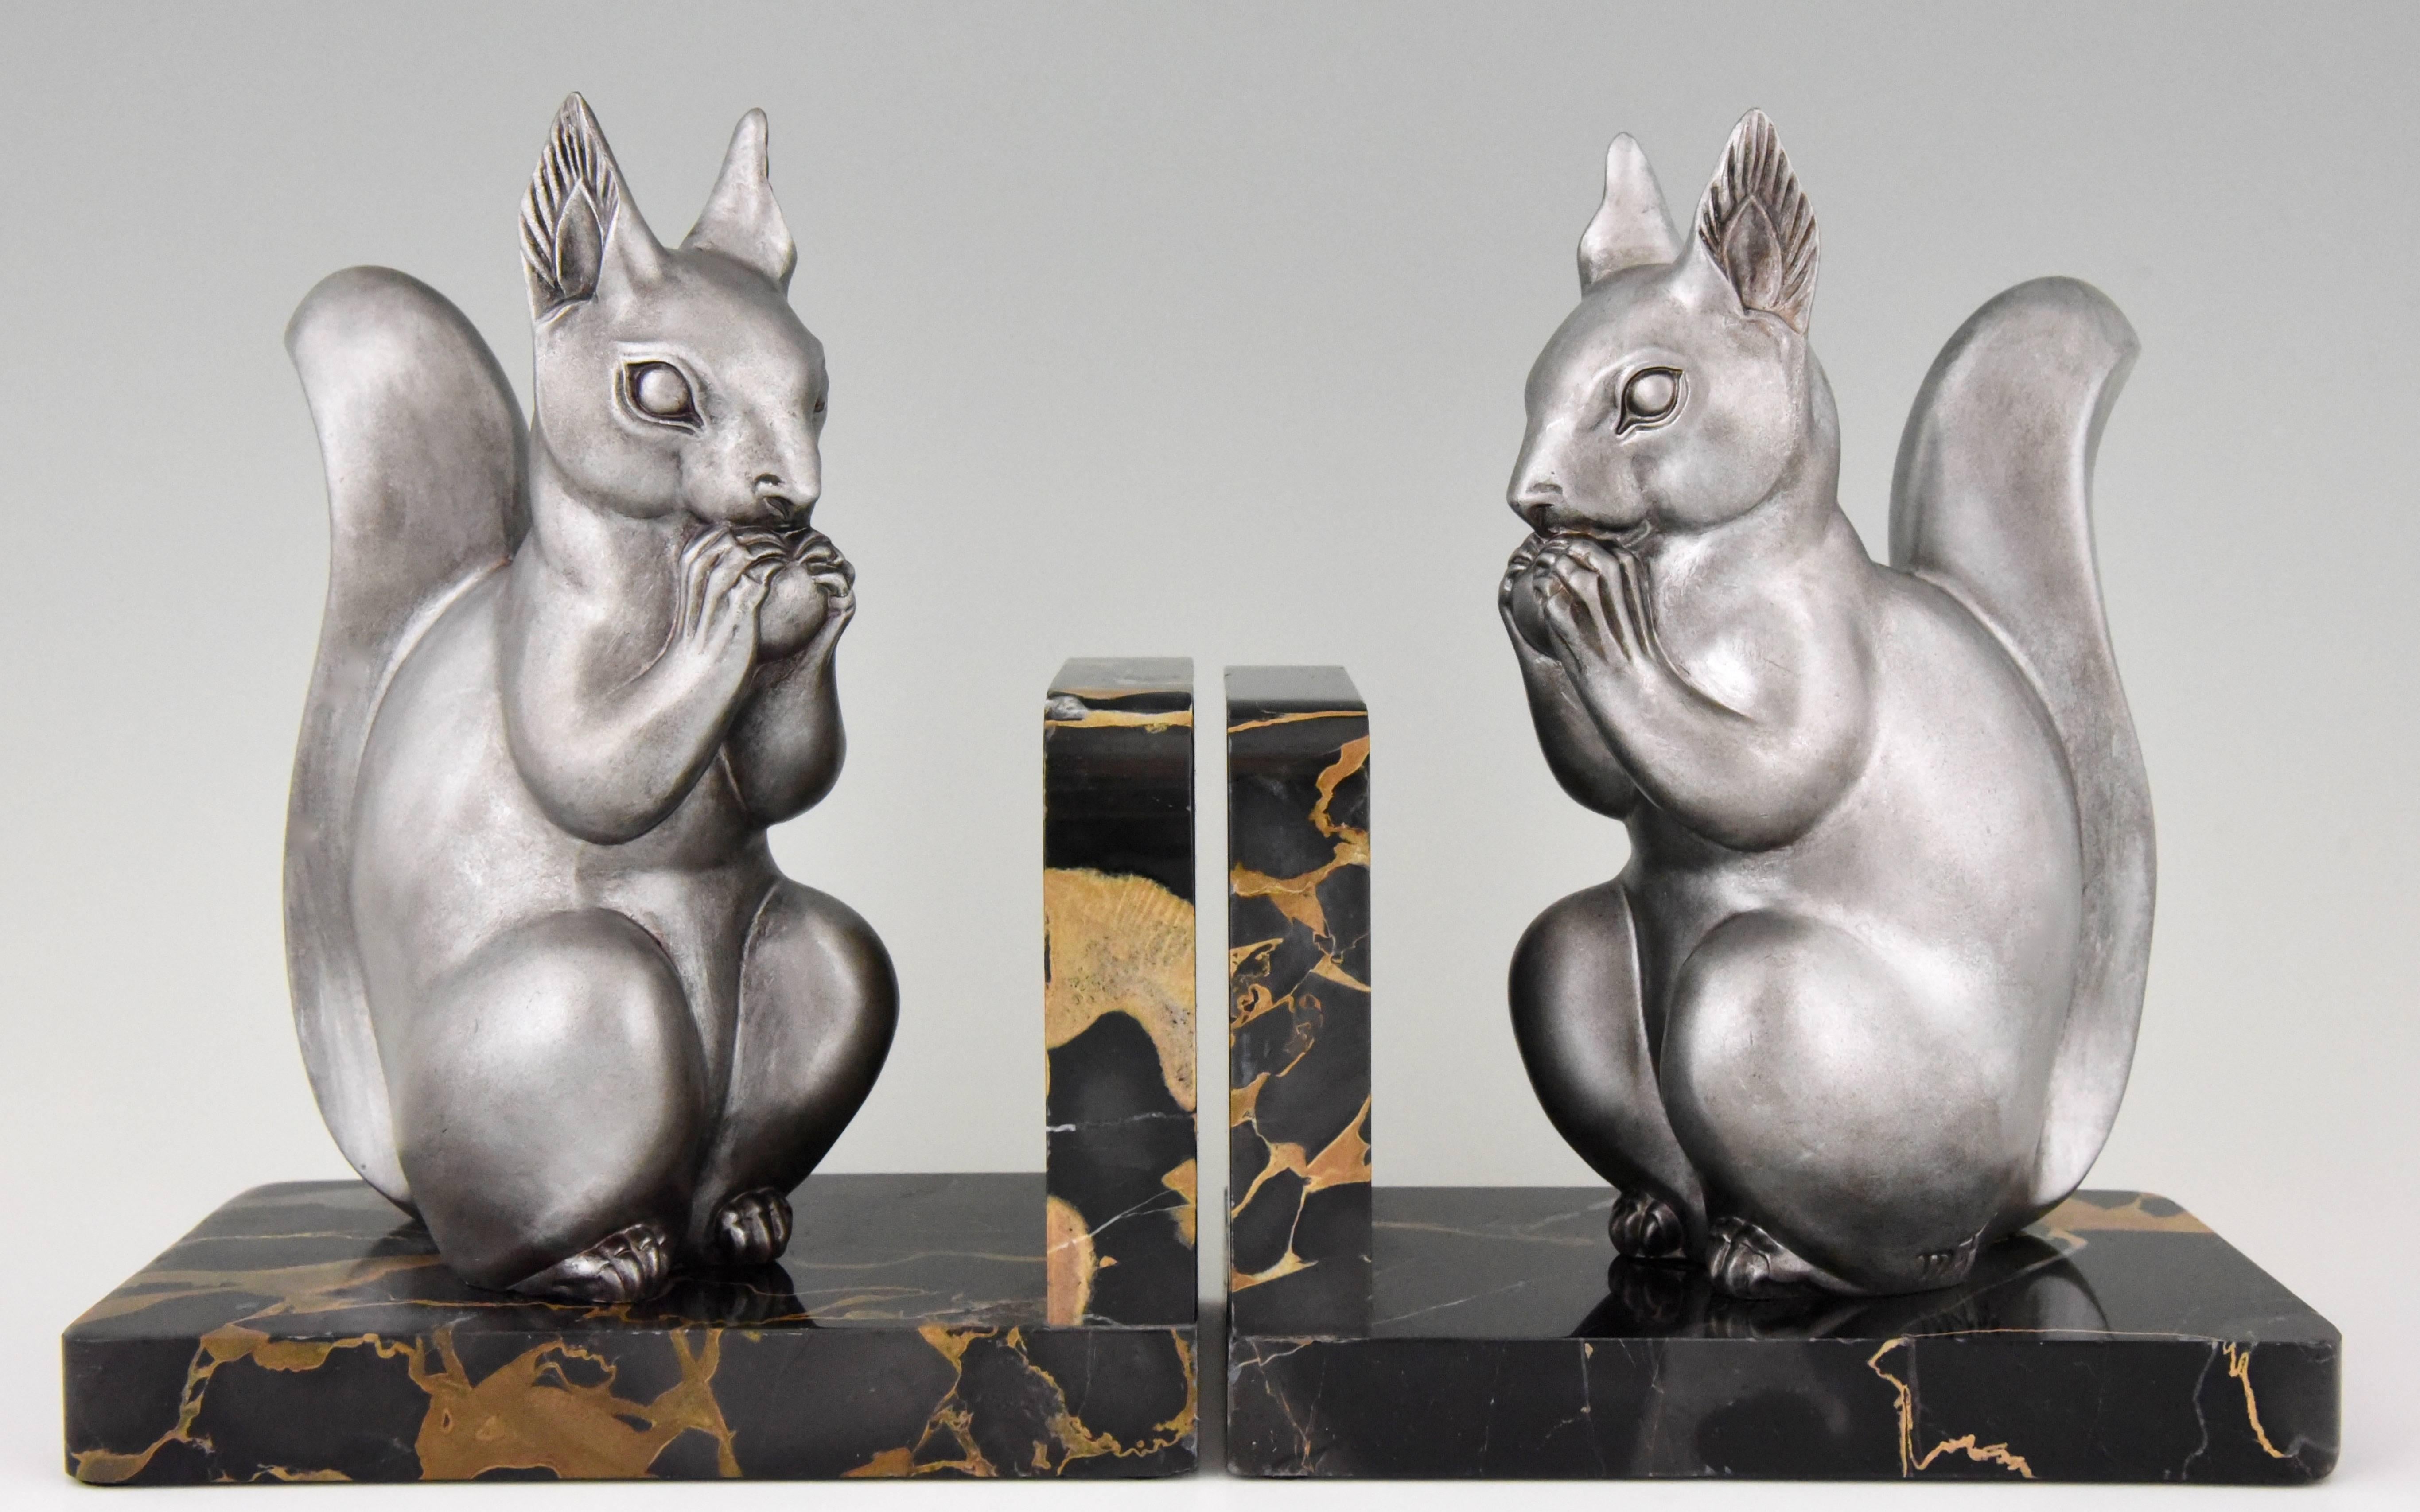 Cute pair of Art Deco squirrel bookends signed by M. Font on a Portor marble base.
Signature/ marks: M. Font.
Style: Art Deco
Date: 1930
Material: Art metal with silver patina. Portor marble base.
Origin: France
Size: H 19.5 cm x L 16 cm. x W